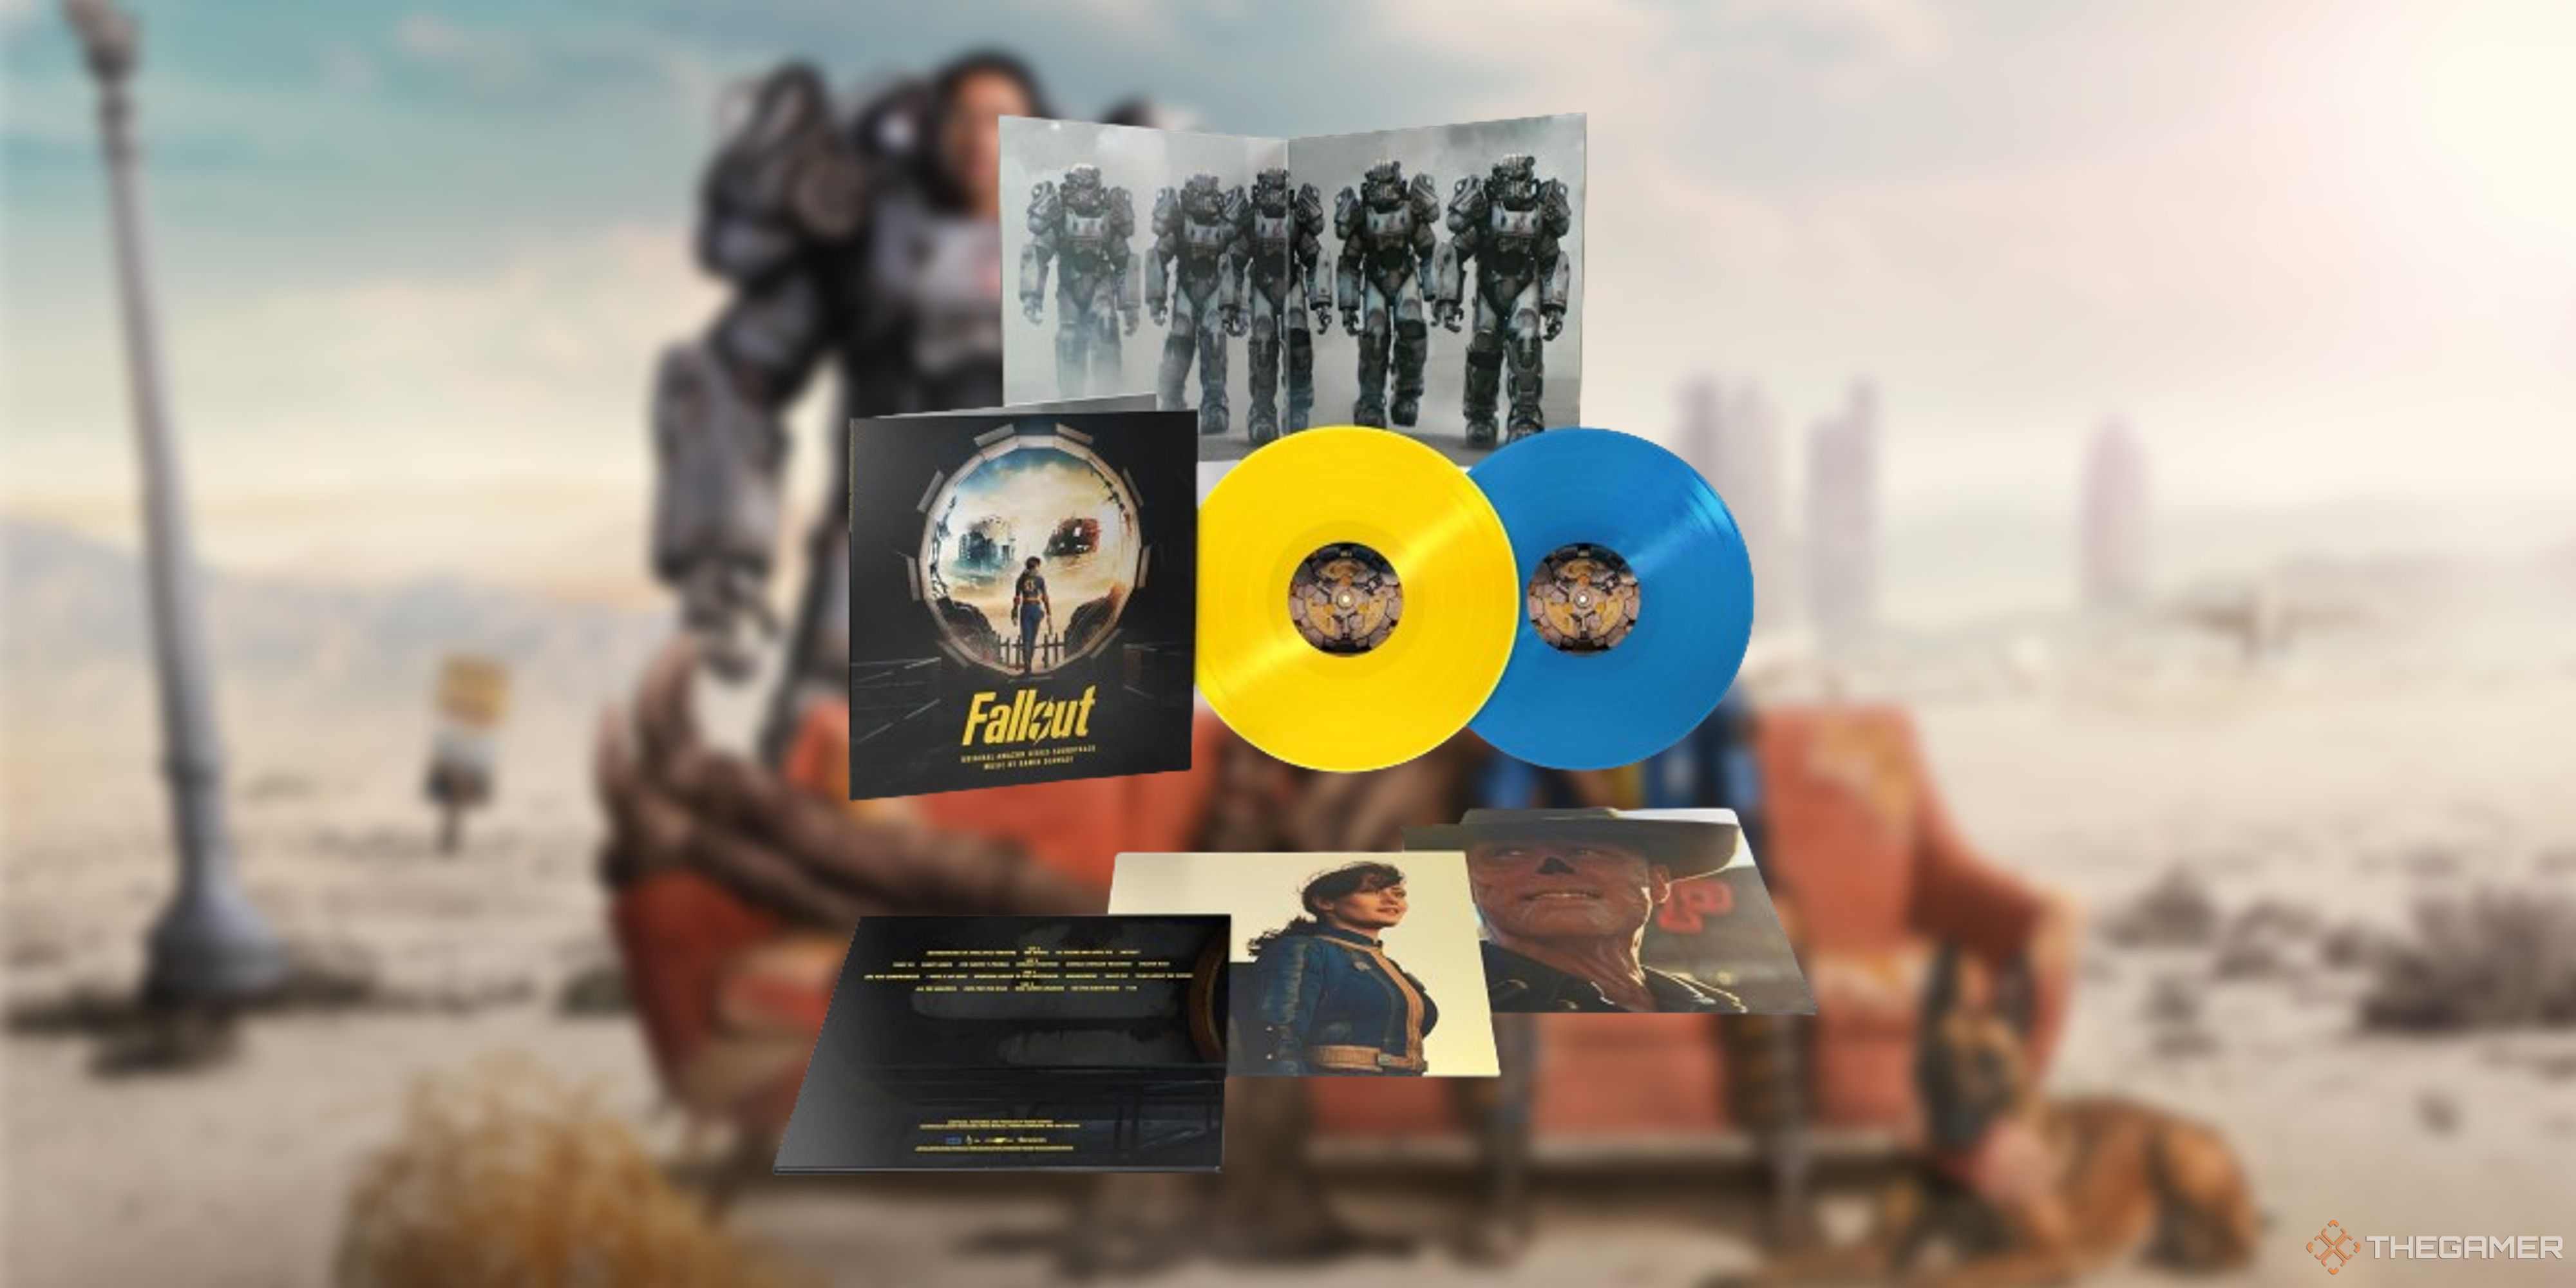 Fallout's Blue And Yellow Vinyl OST Is Availble To Pre-Order On Amazon